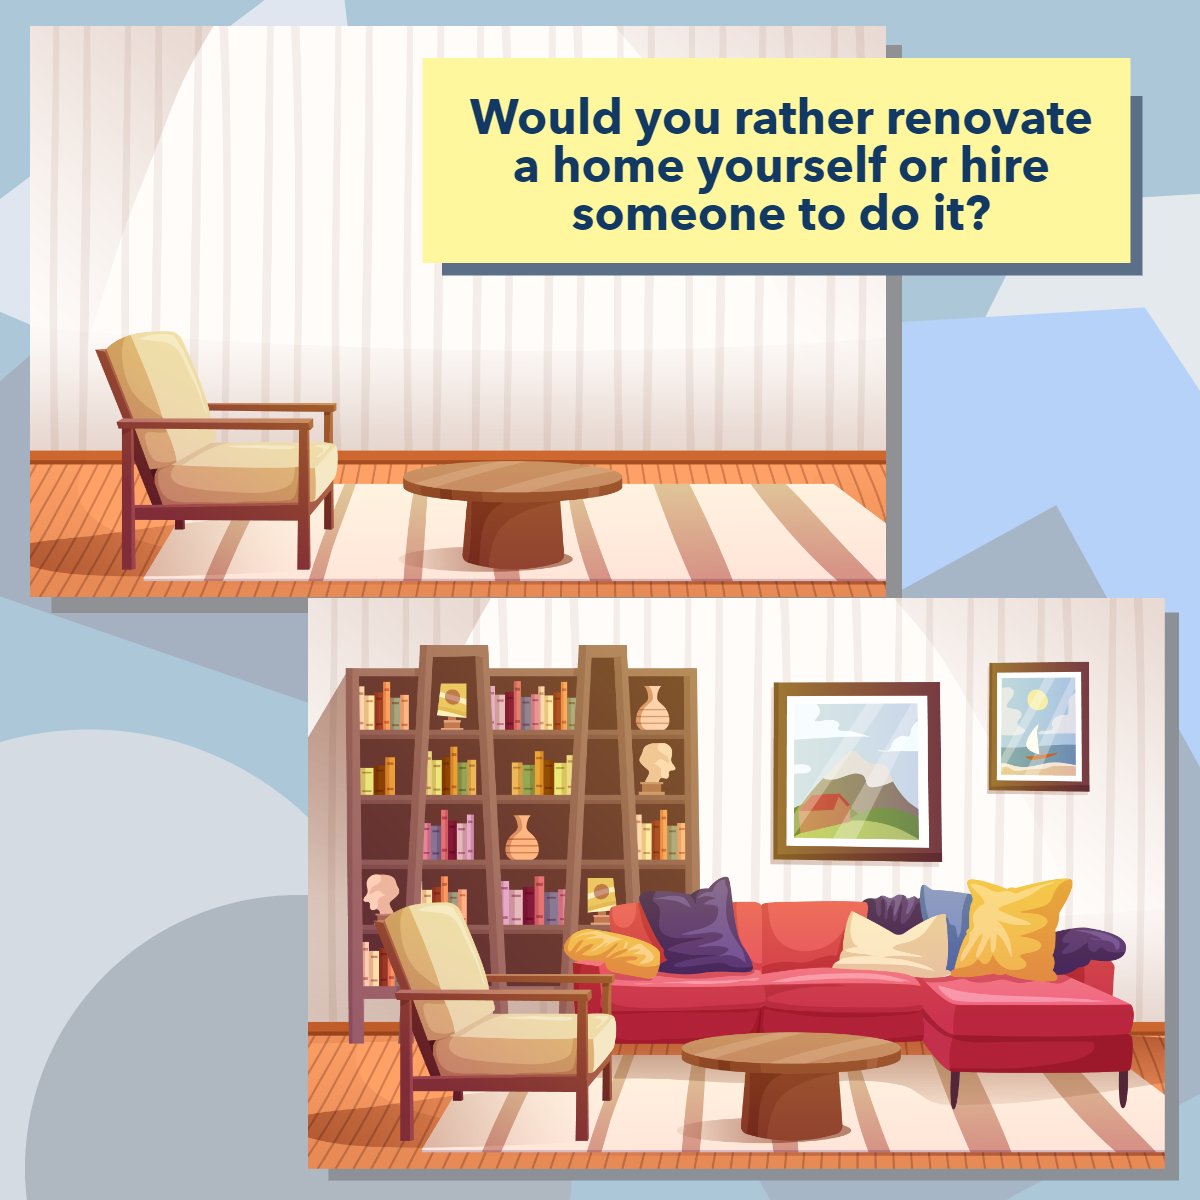 Would you do your dream renovation project yourself or hire someone?

Let us know below!

#HomeRenovation #DIYHome
 #lannonstonerealty